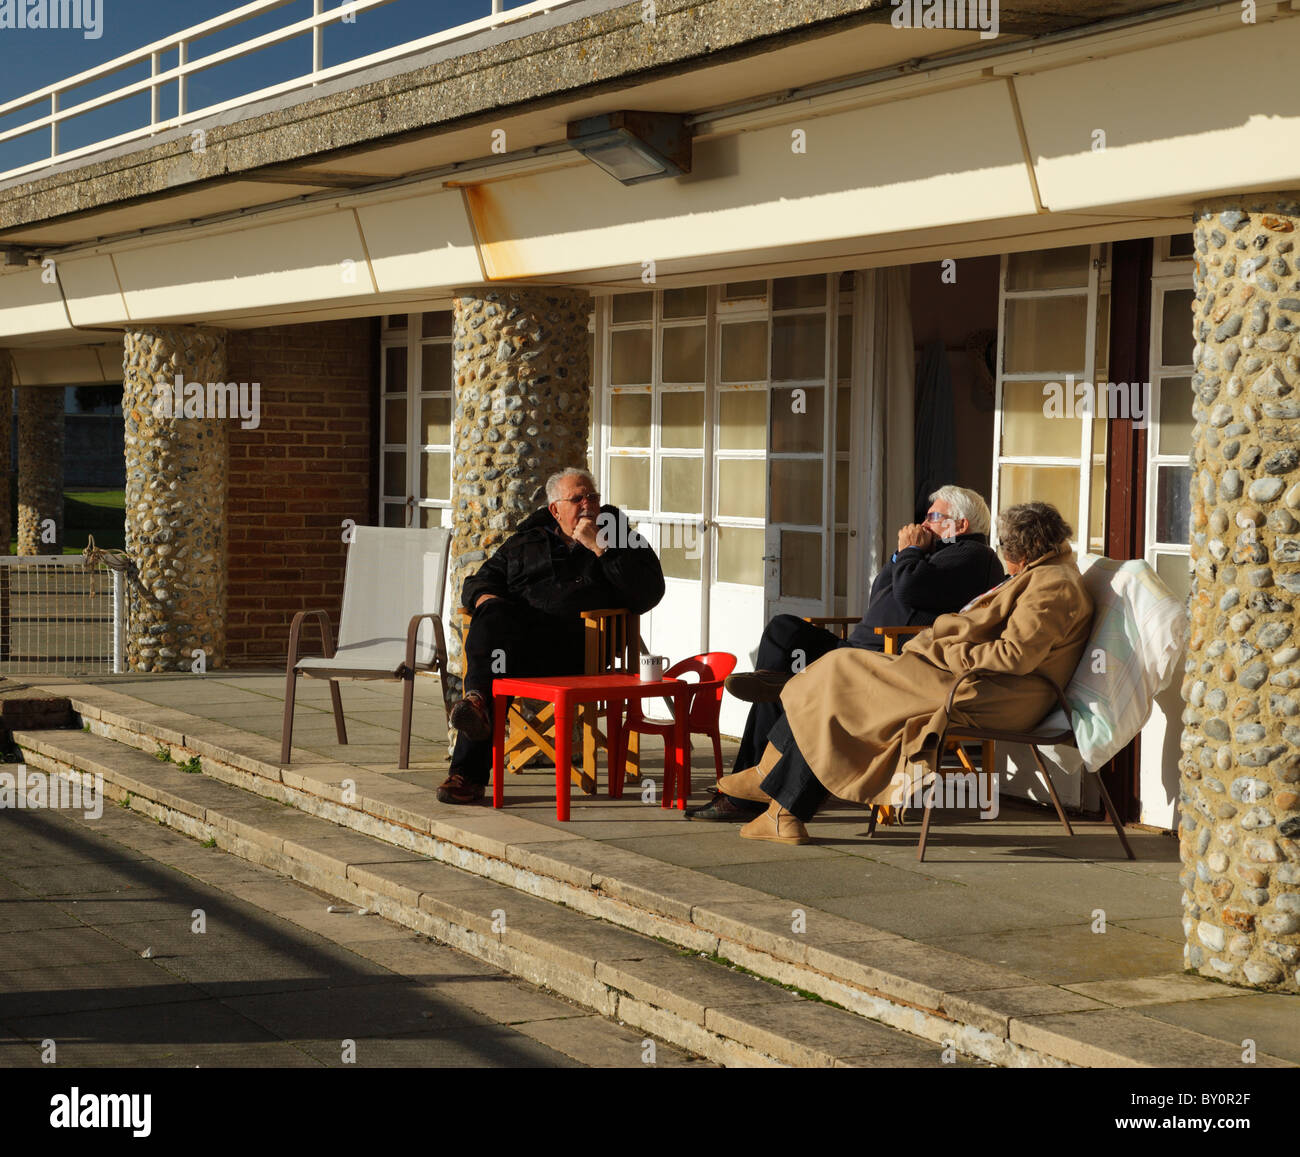 People sitting outside their seaside chalet. Stock Photo